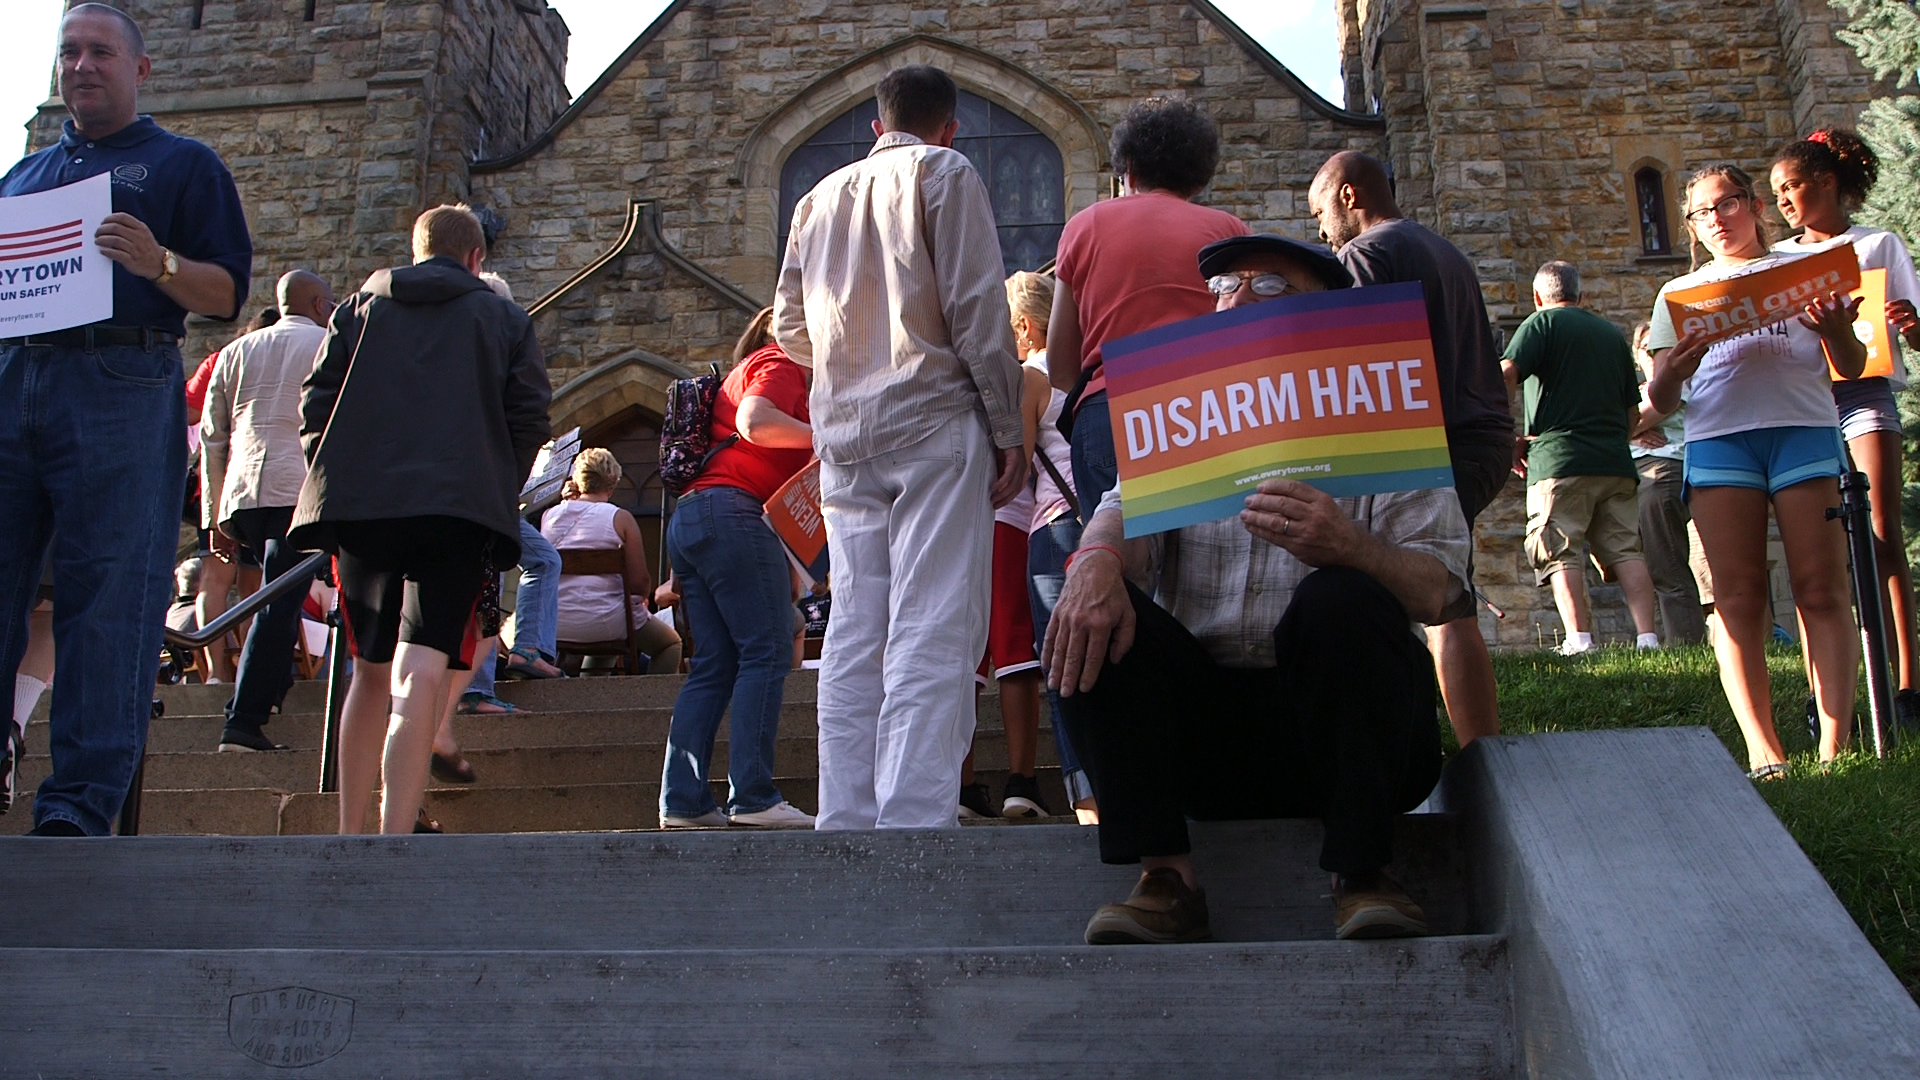 Man holding a "Disarm Hate" sign at Pittsburgh rally.